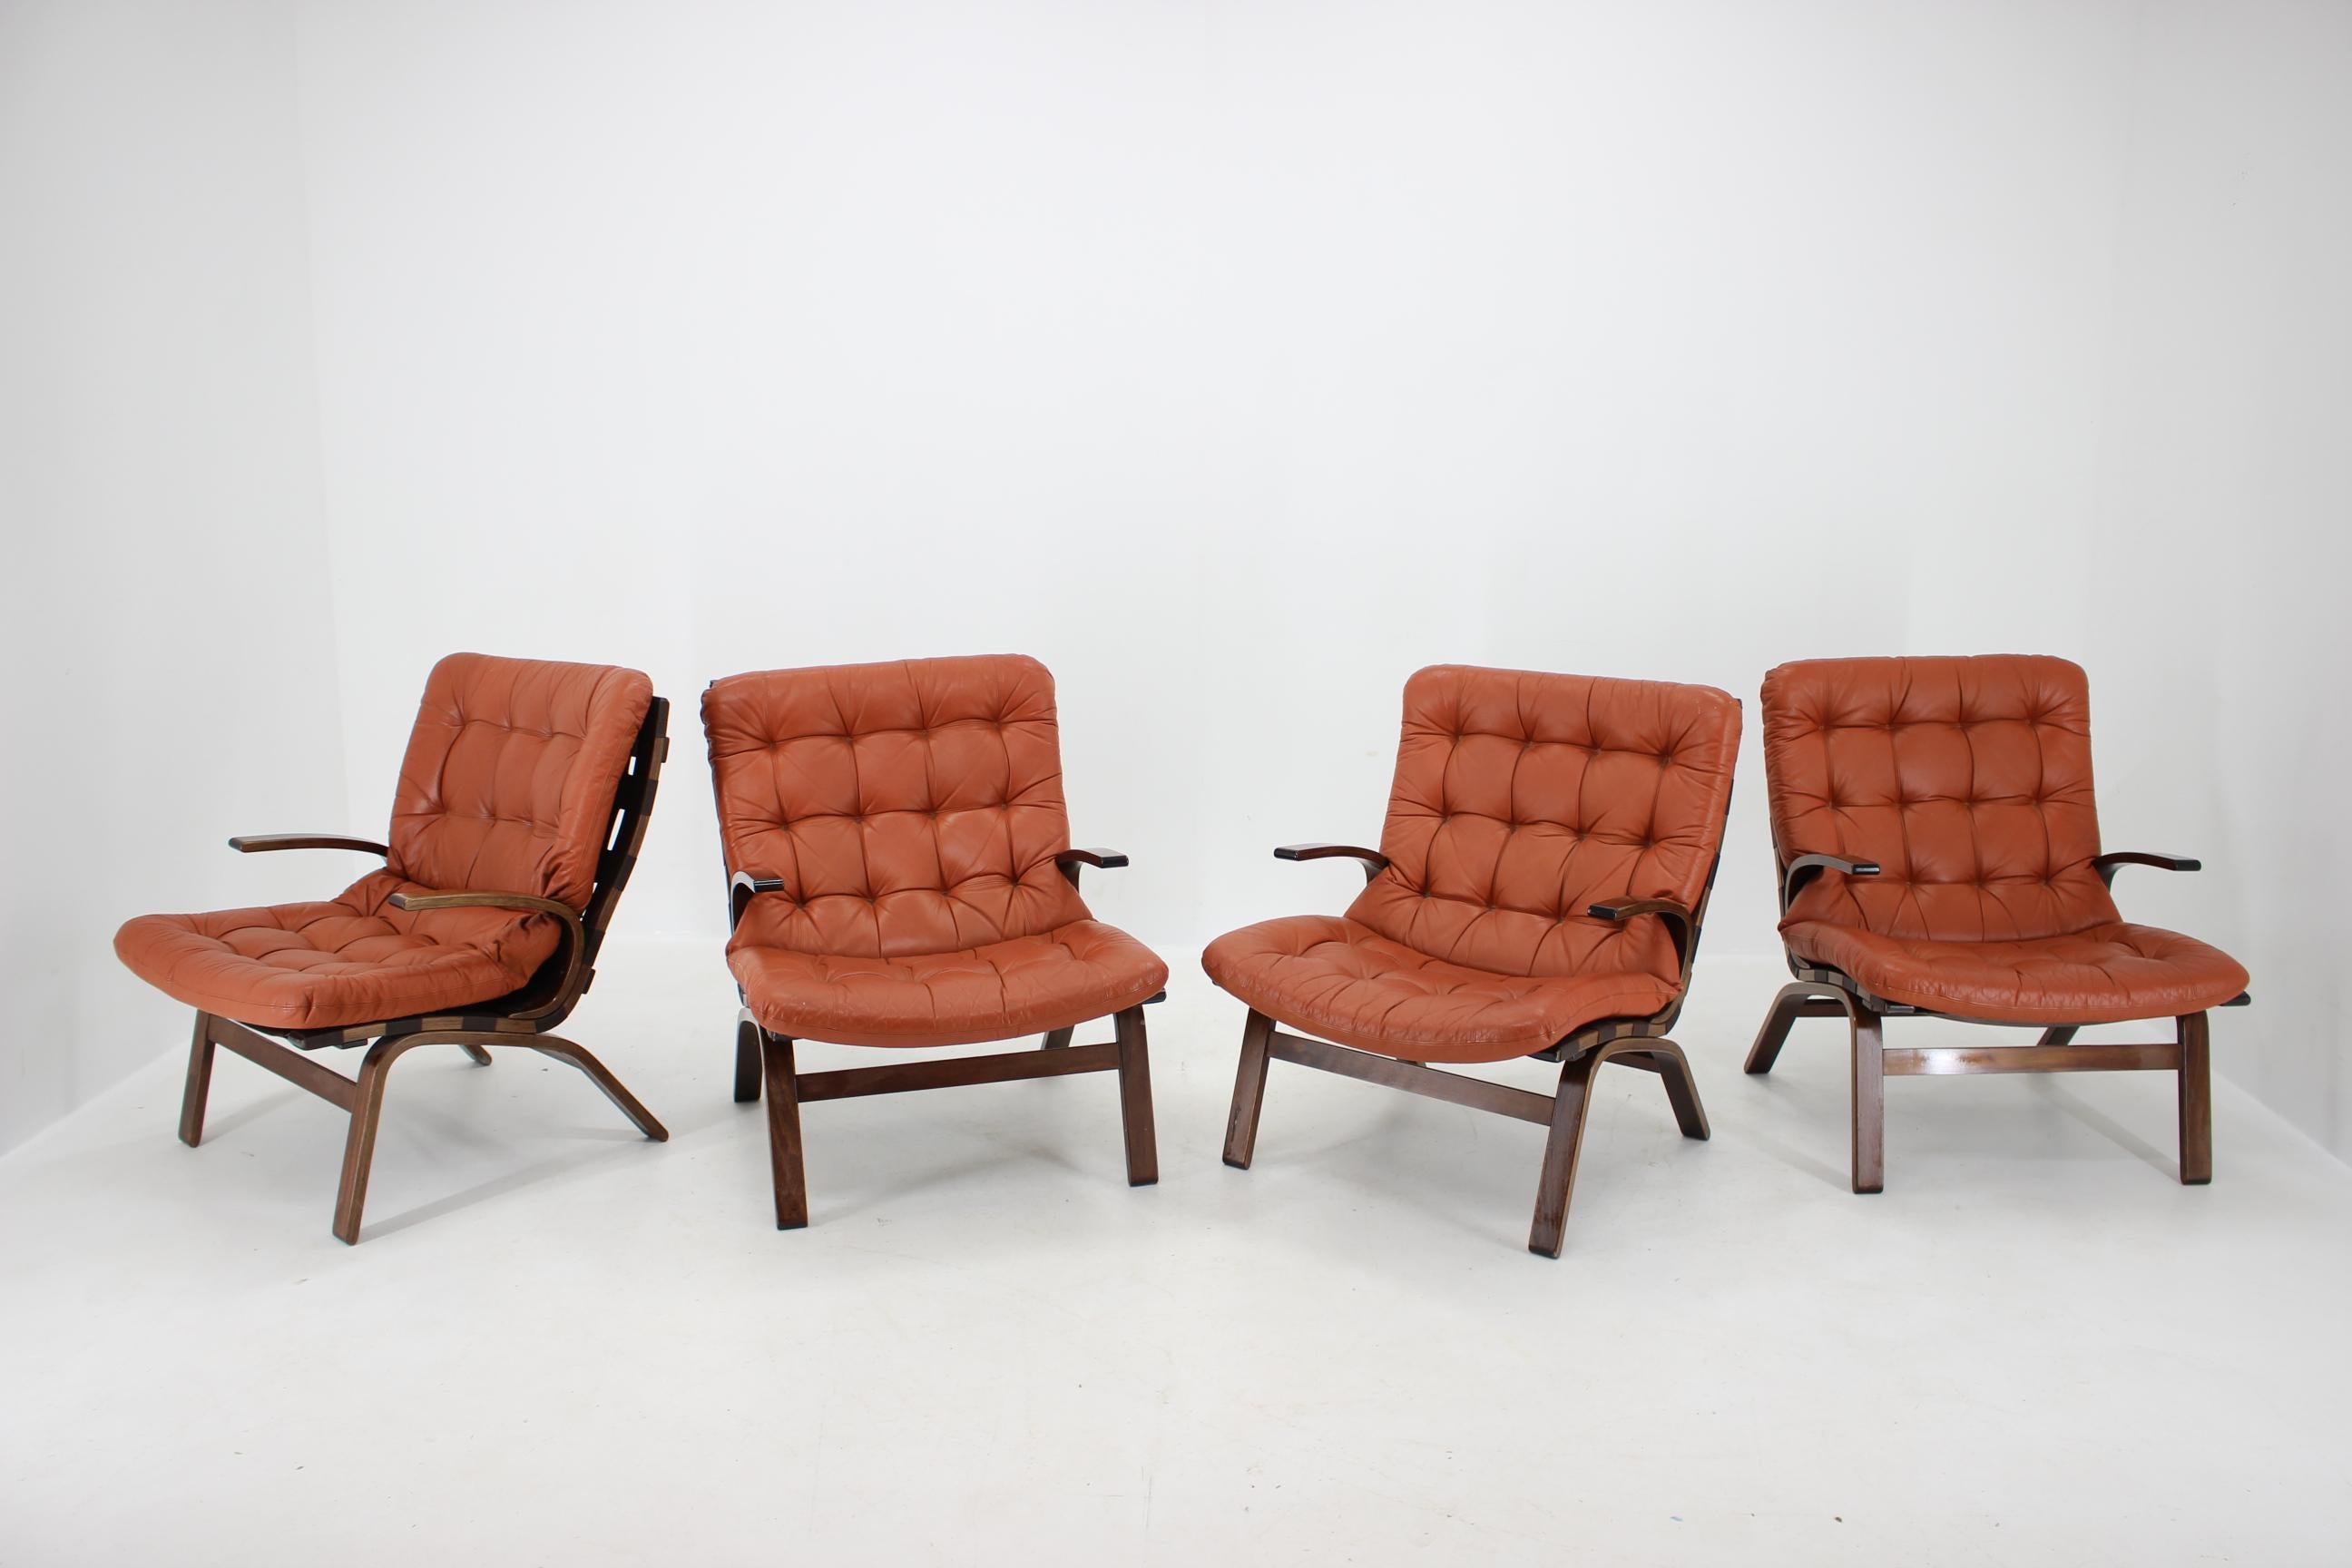 Mid-Century Modern 1970s Danish Bentwood Armchair in Red Leather, Set of 4